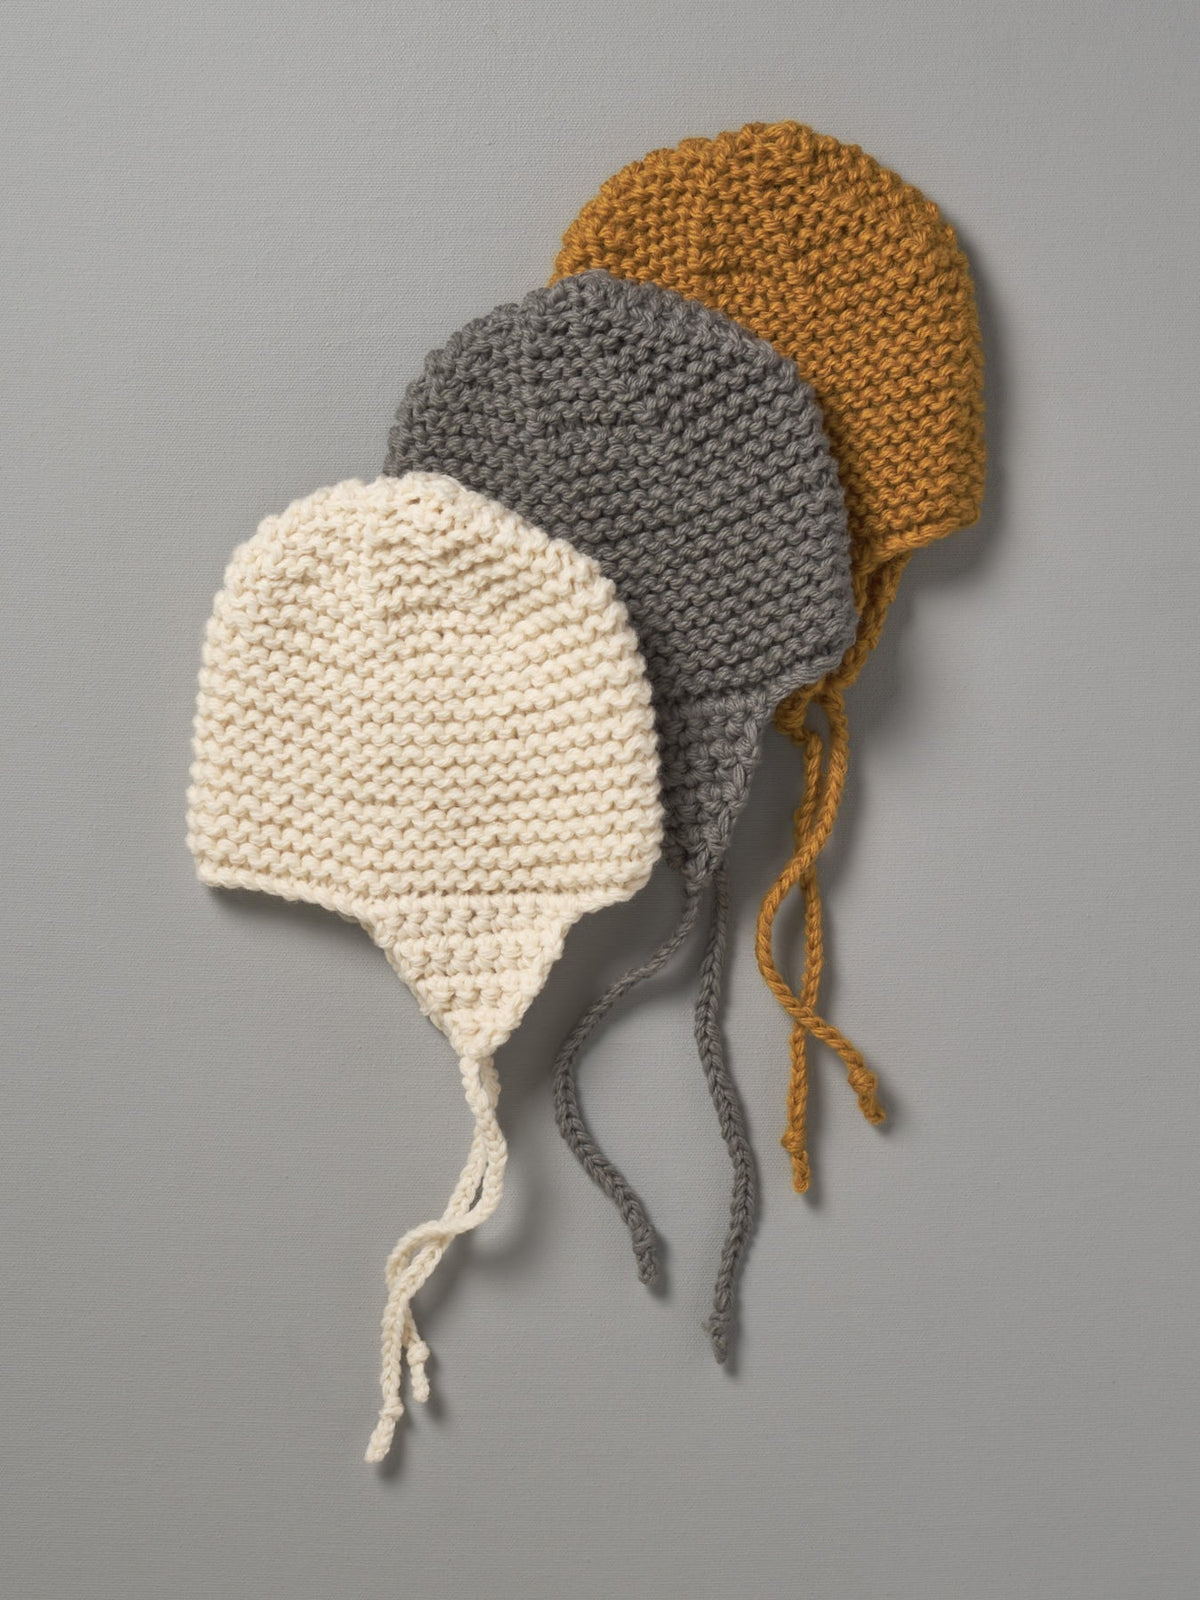 Three Hand Knitted Chunky Knit Hats - Mustard by Weebits on a grey background.